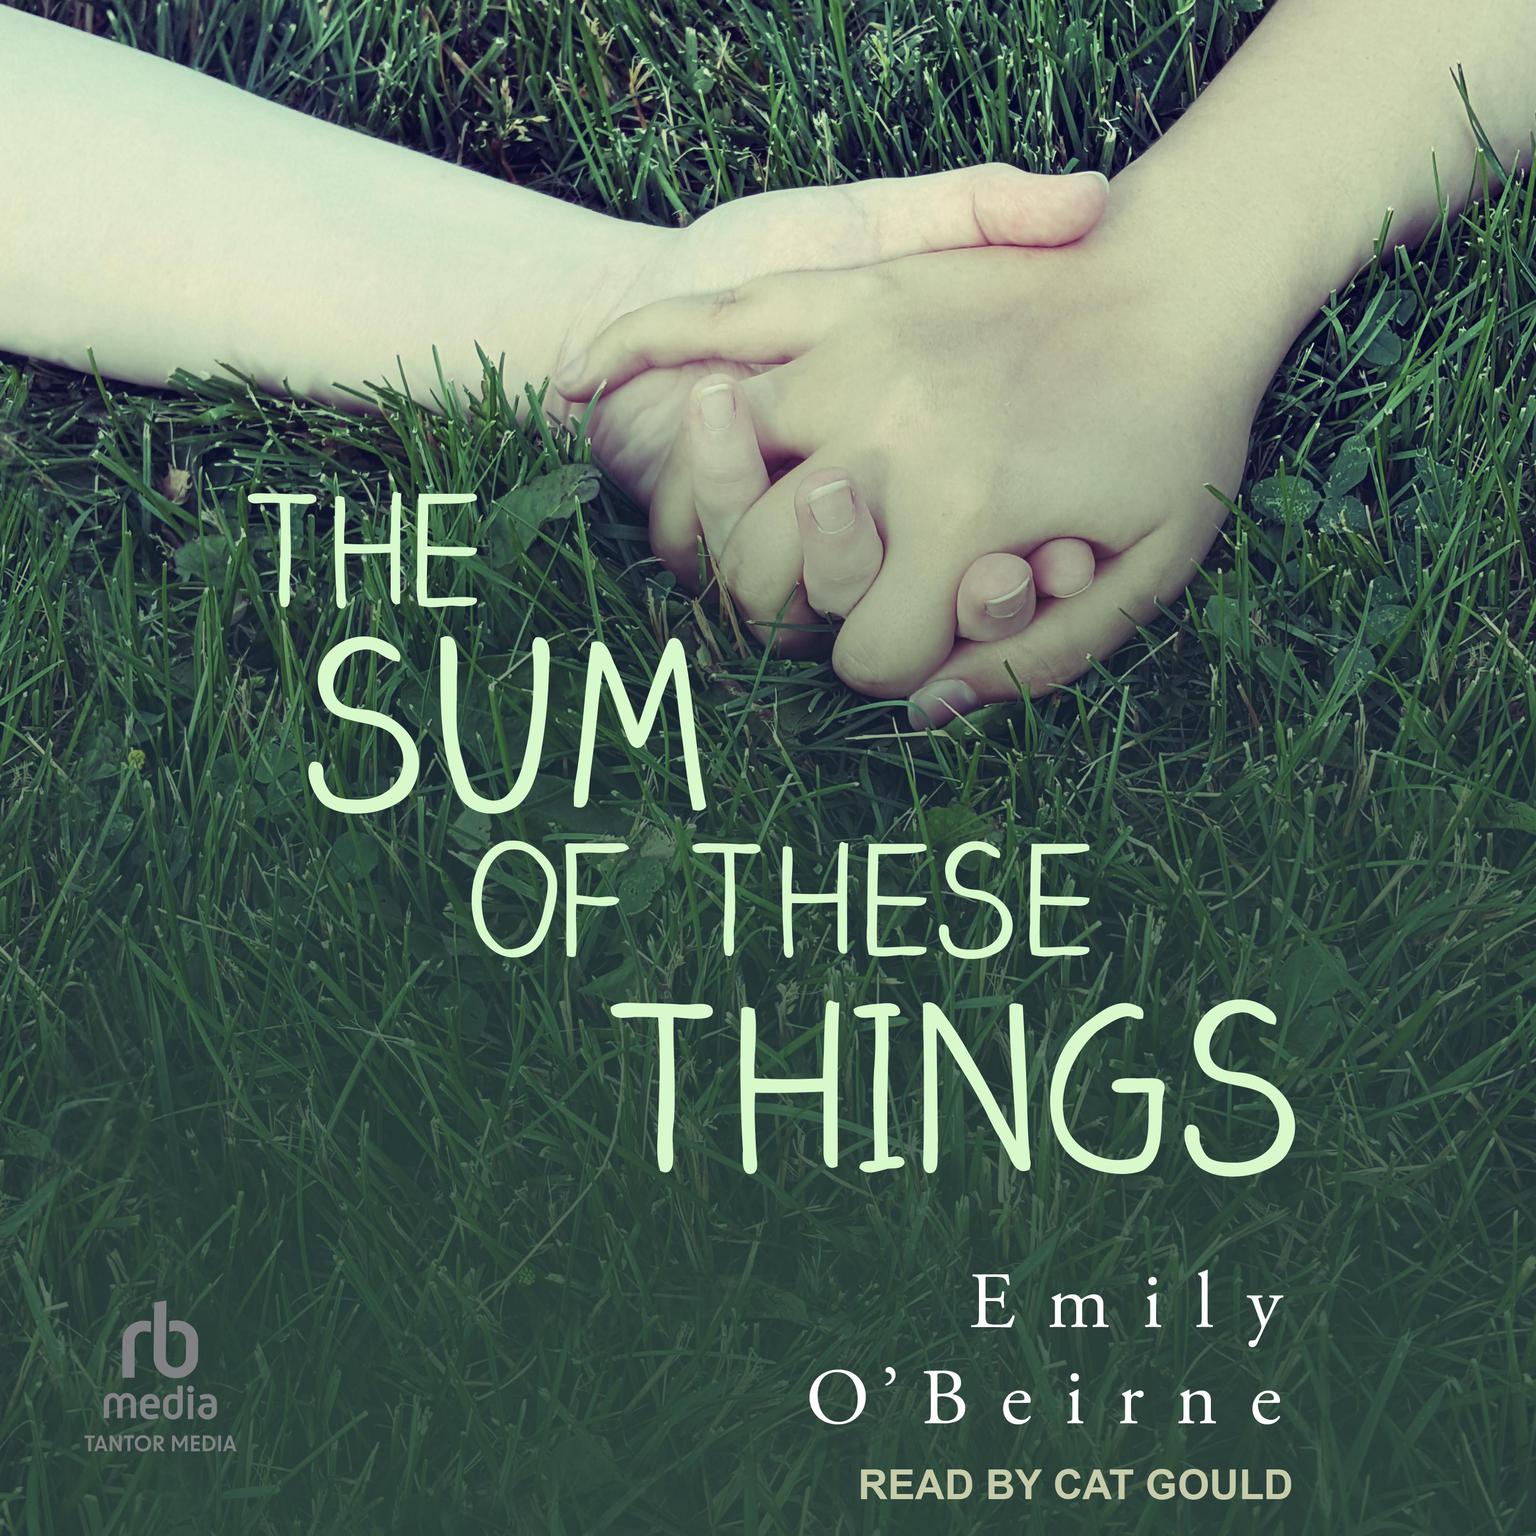 Cat Gould, Emily O'Beirne: The Sum of These Things (AudiobookFormat, 2022, Tantor Audio)